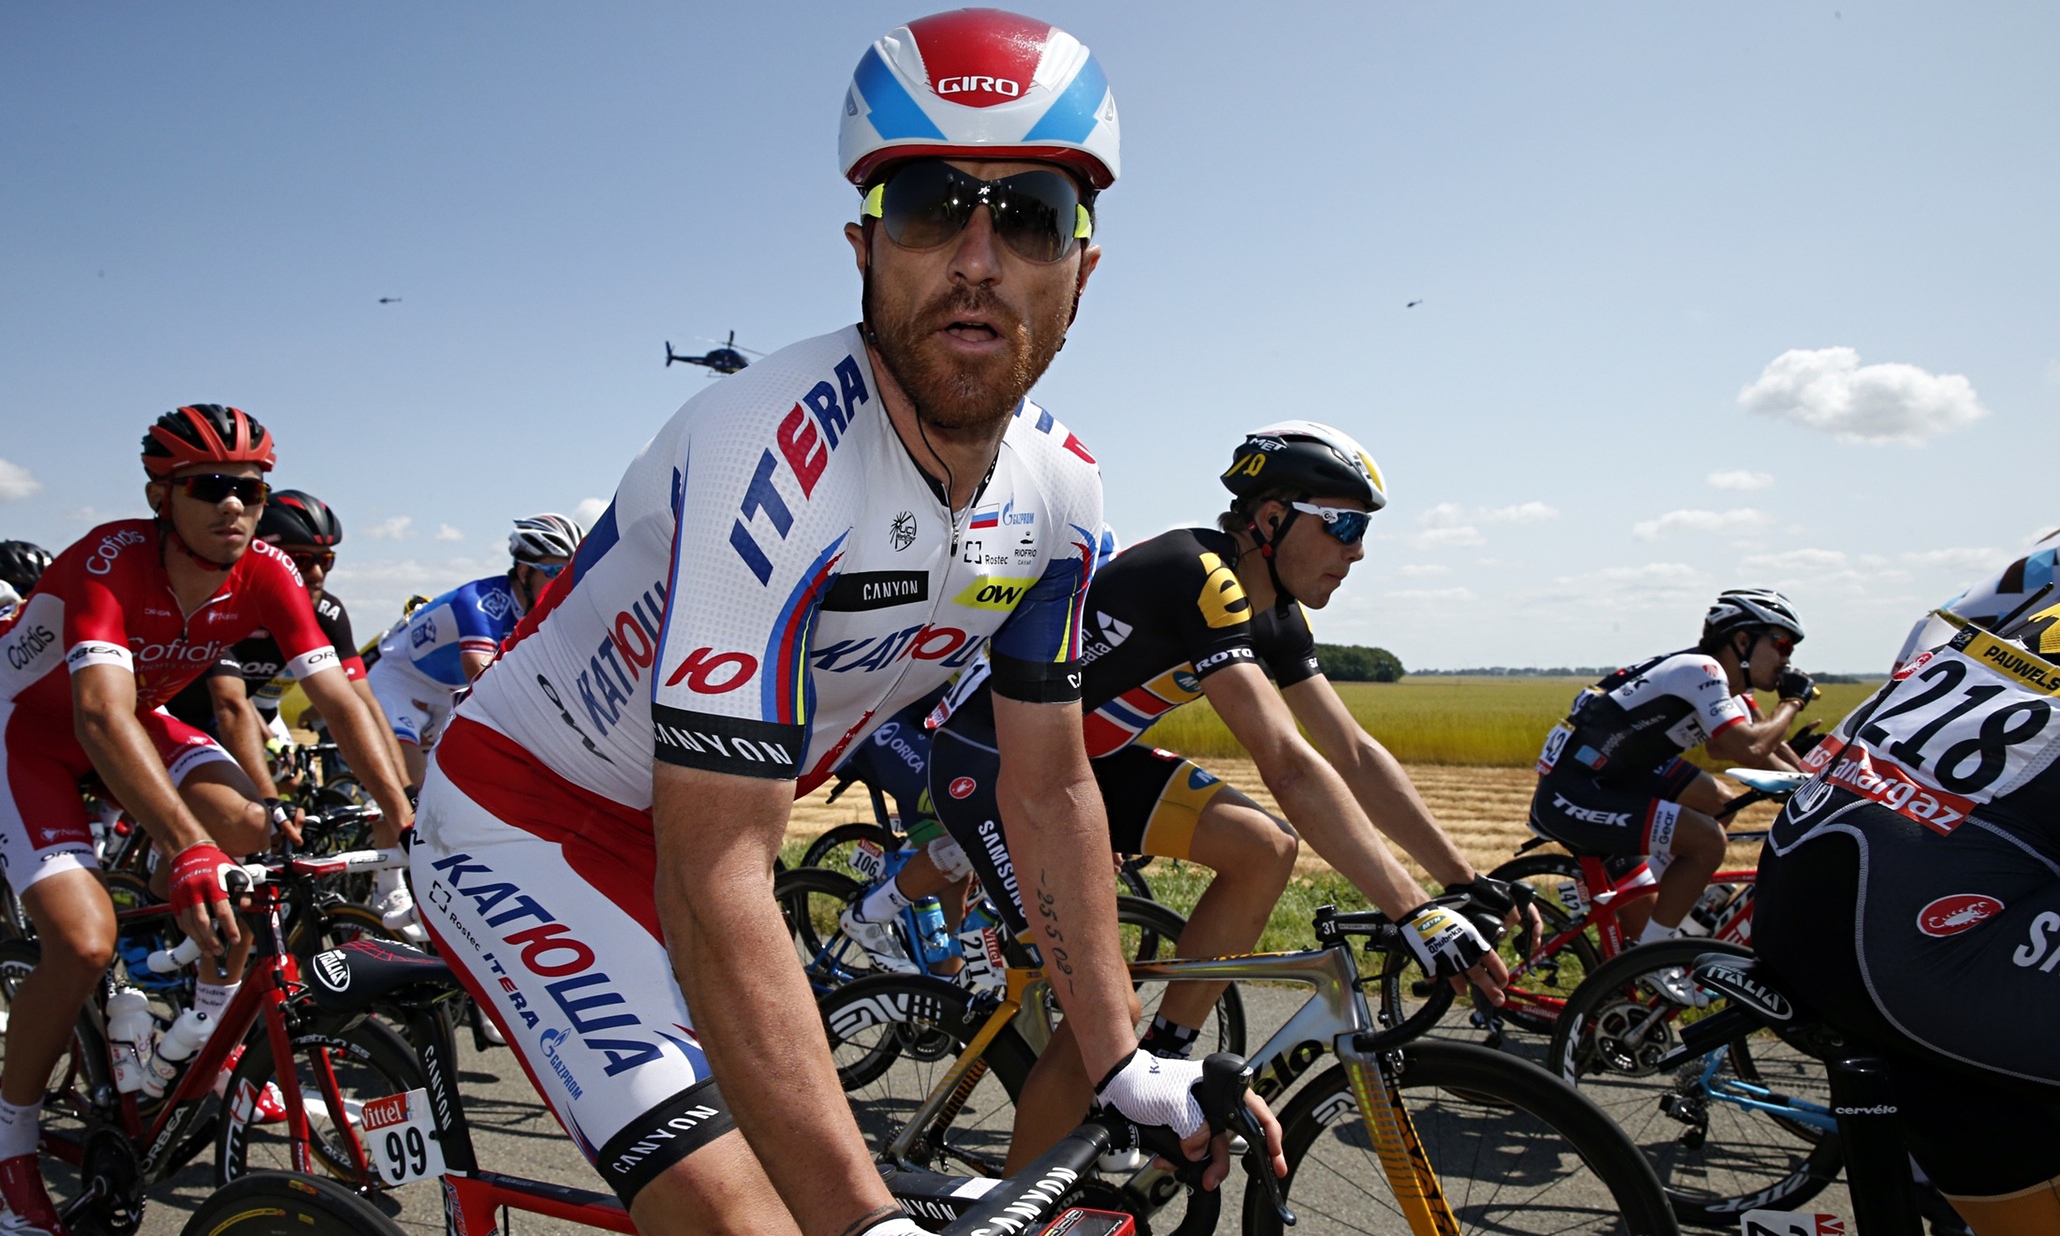 Luca Paolini out of Tour de France after testing positive for cocaine